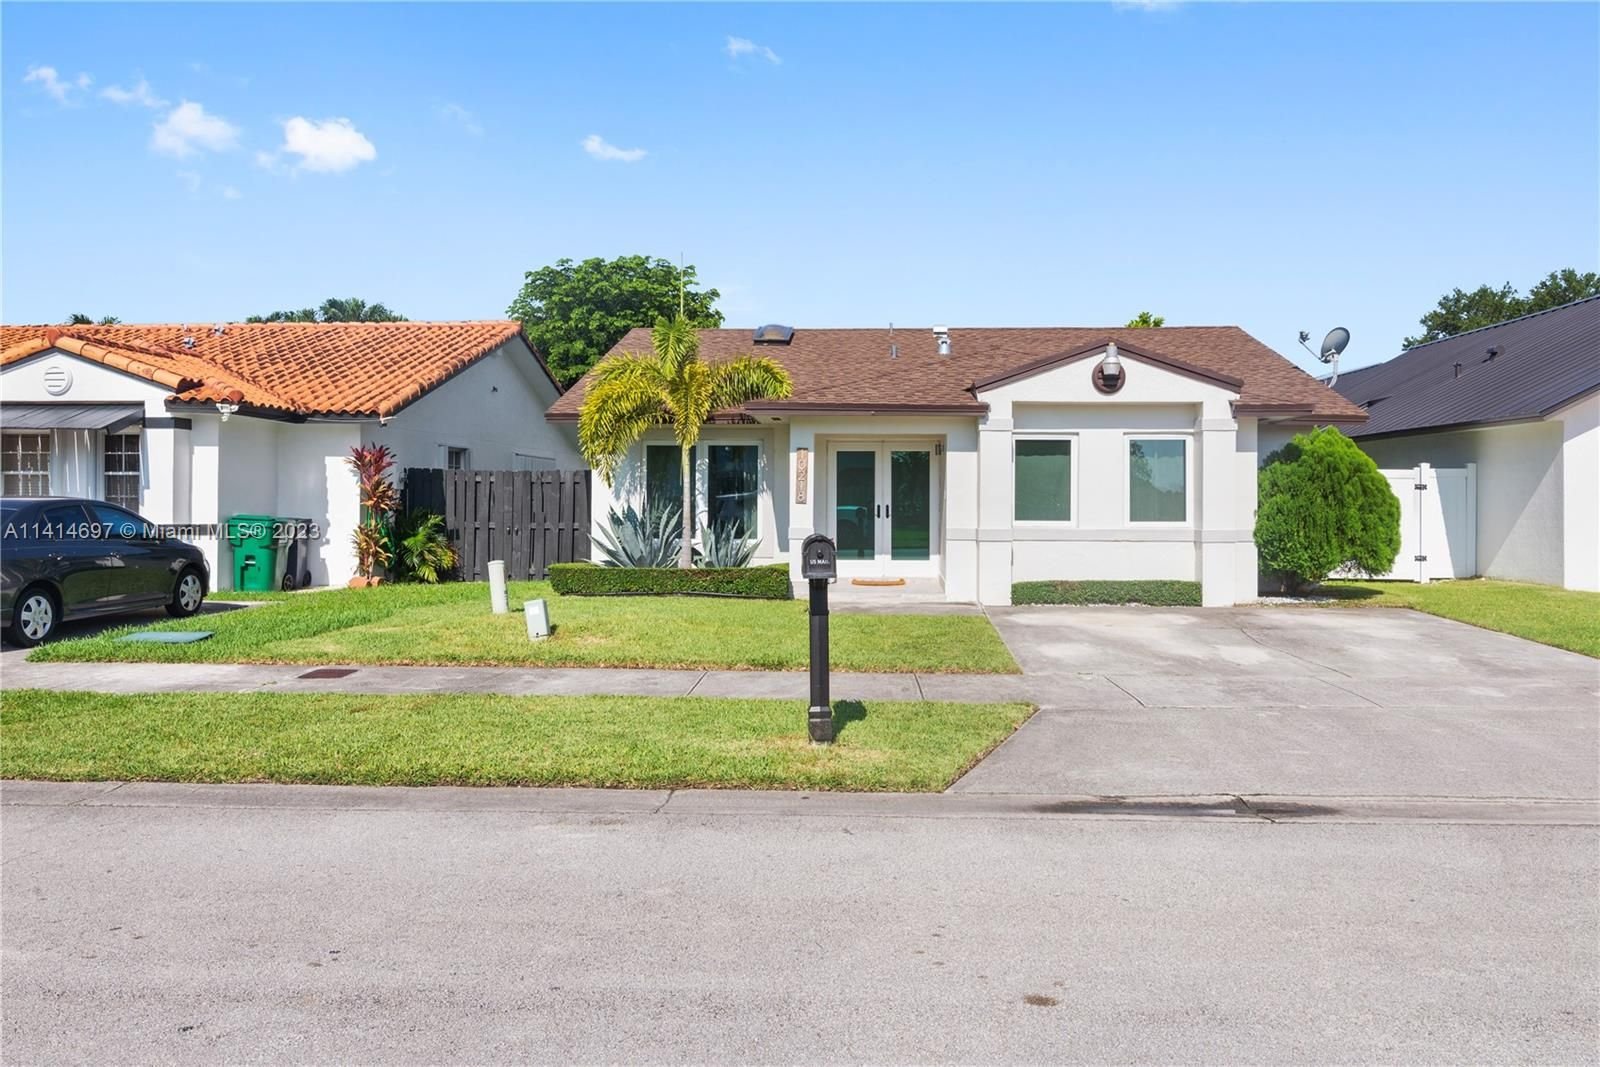 Real estate property located at 10218 143rd Pl, Miami-Dade County, Miami, FL